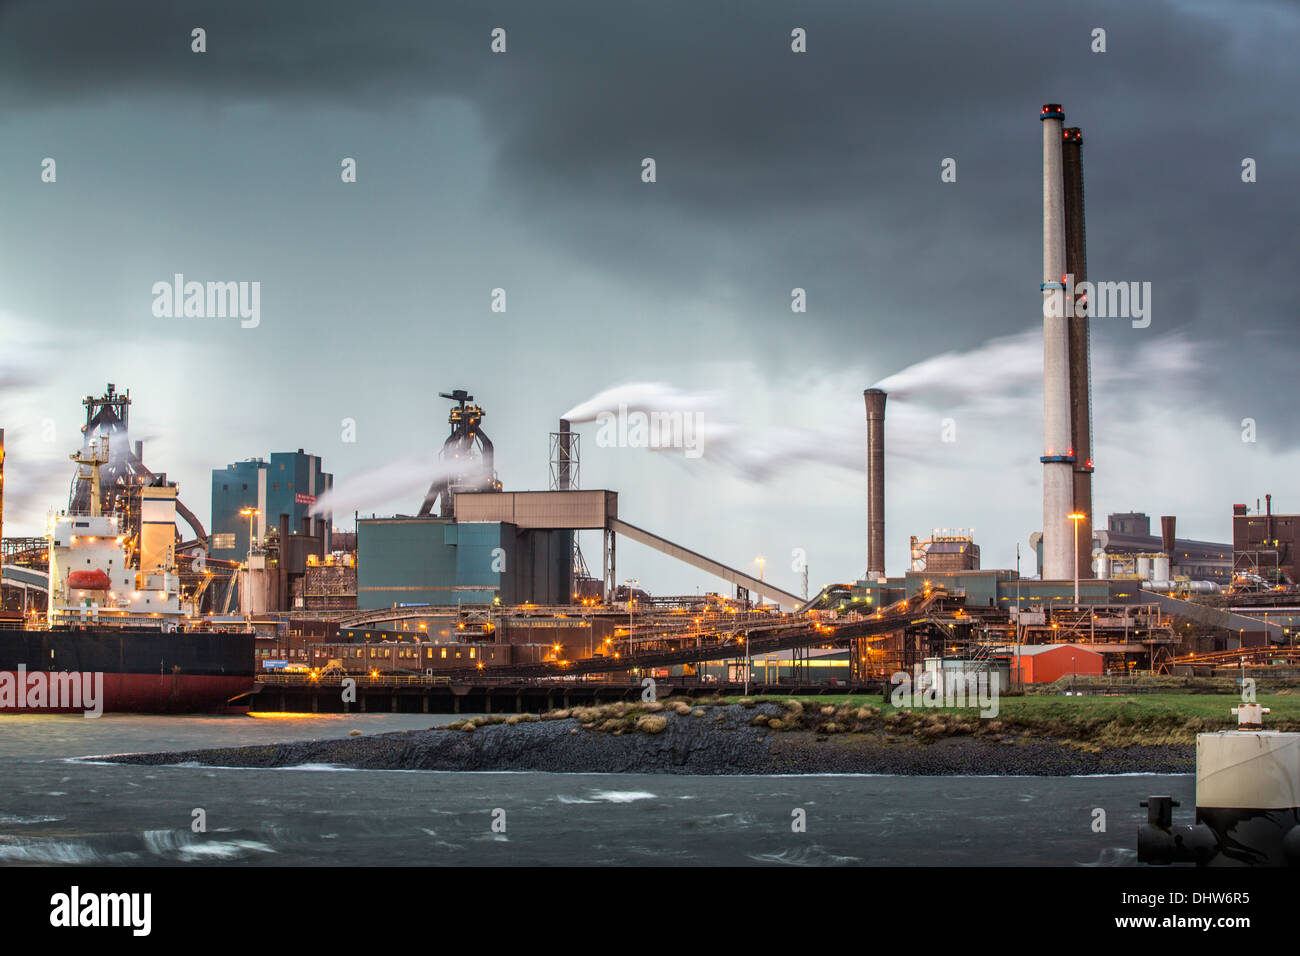 3,140 Tata Steel Stock Photos, High-Res Pictures, and Images - Getty Images